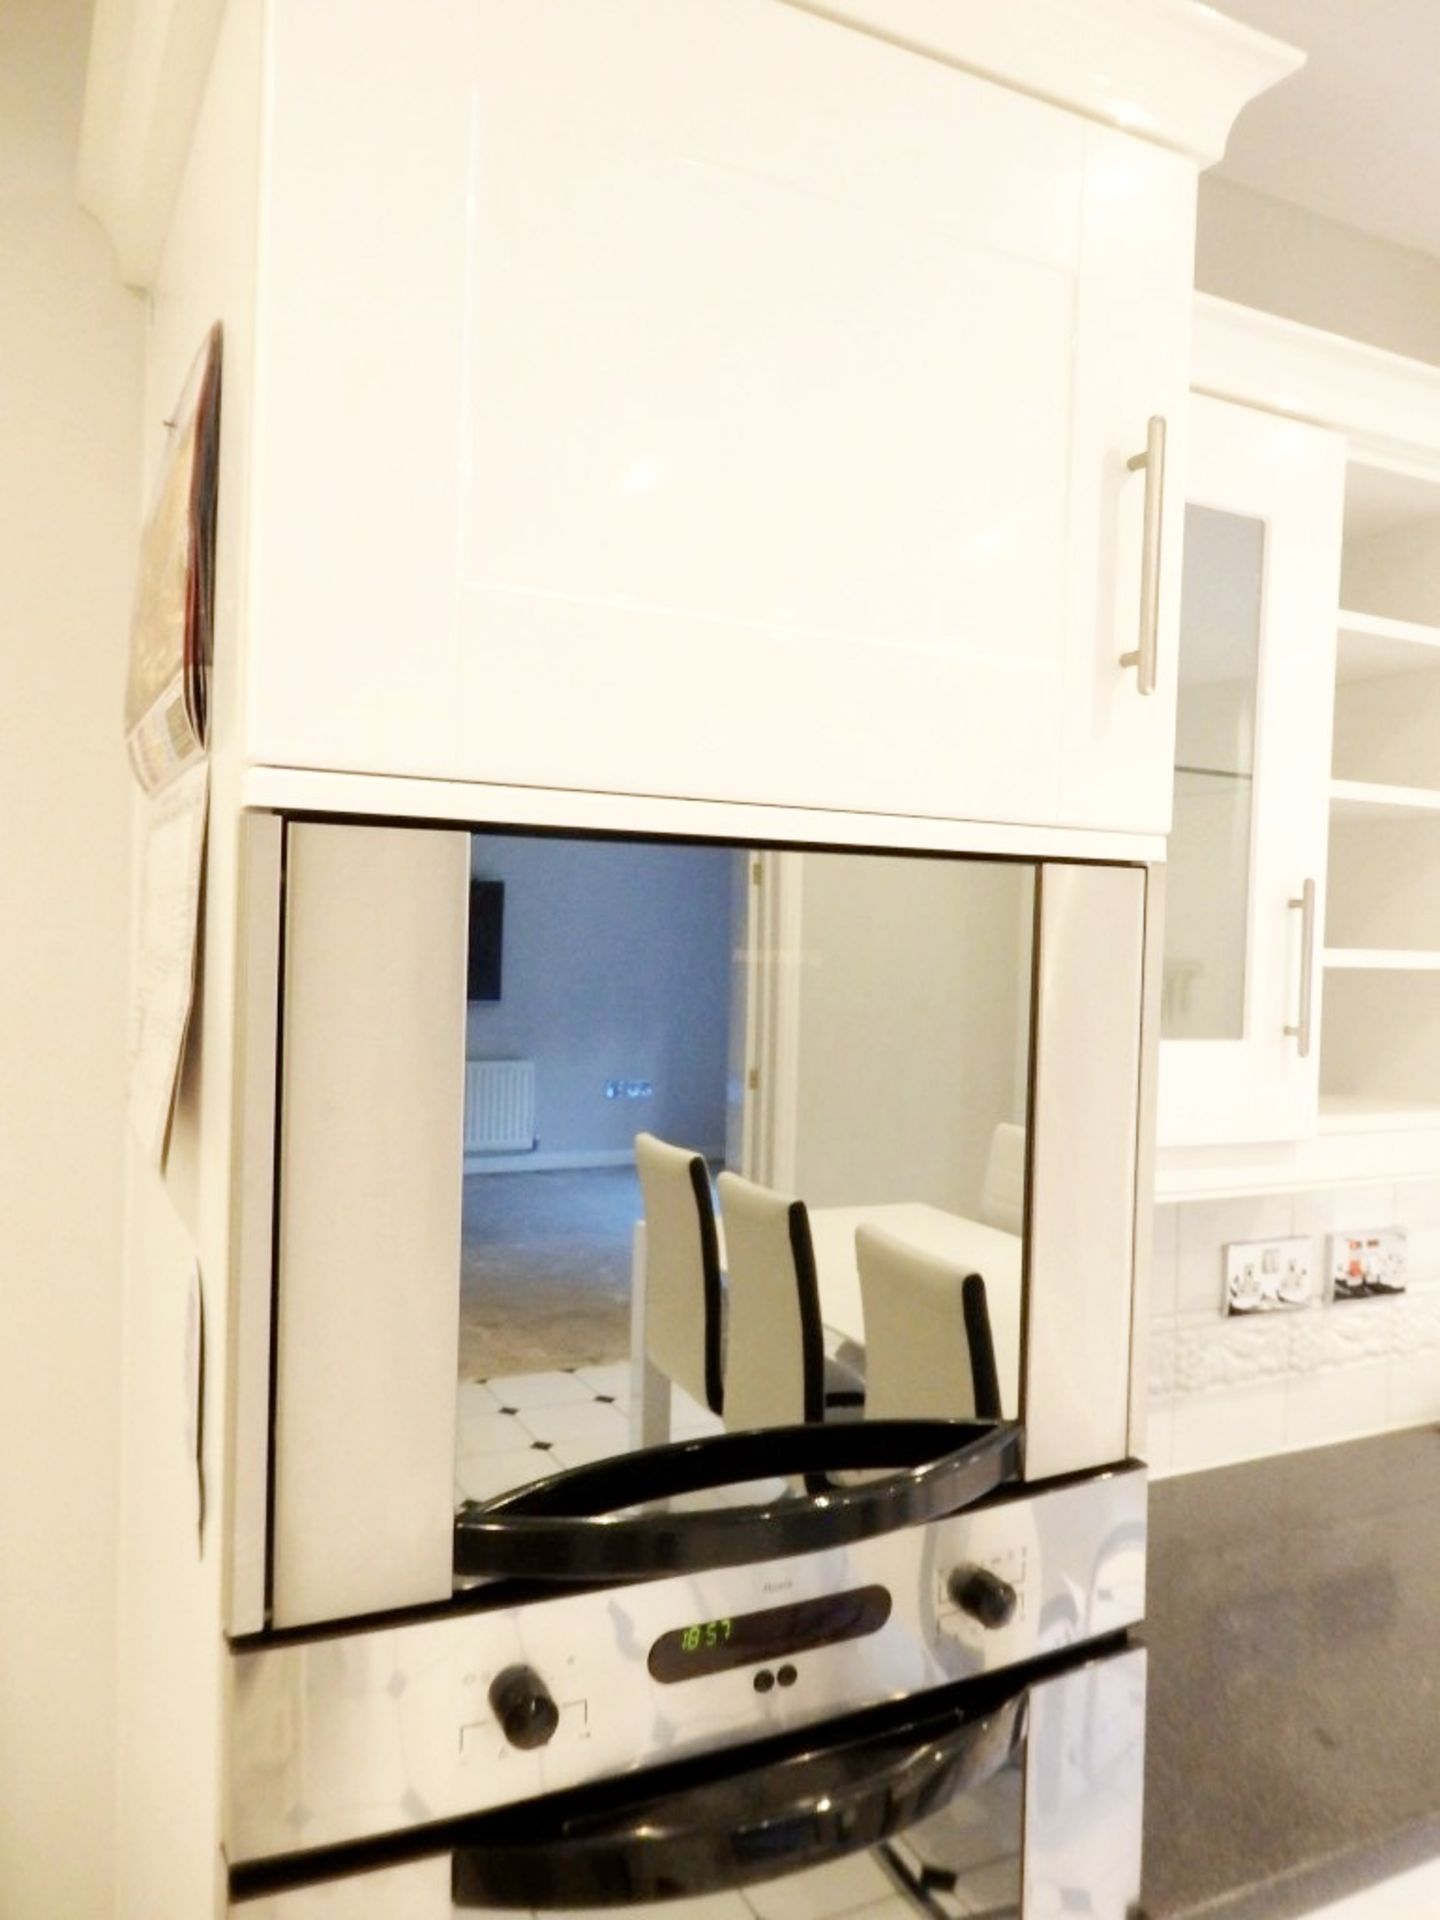 1 x White High Gloss Kitchen With Neff Integrated Dishwasher, 5 Ring Stainless Steel Hob, and - Image 12 of 20